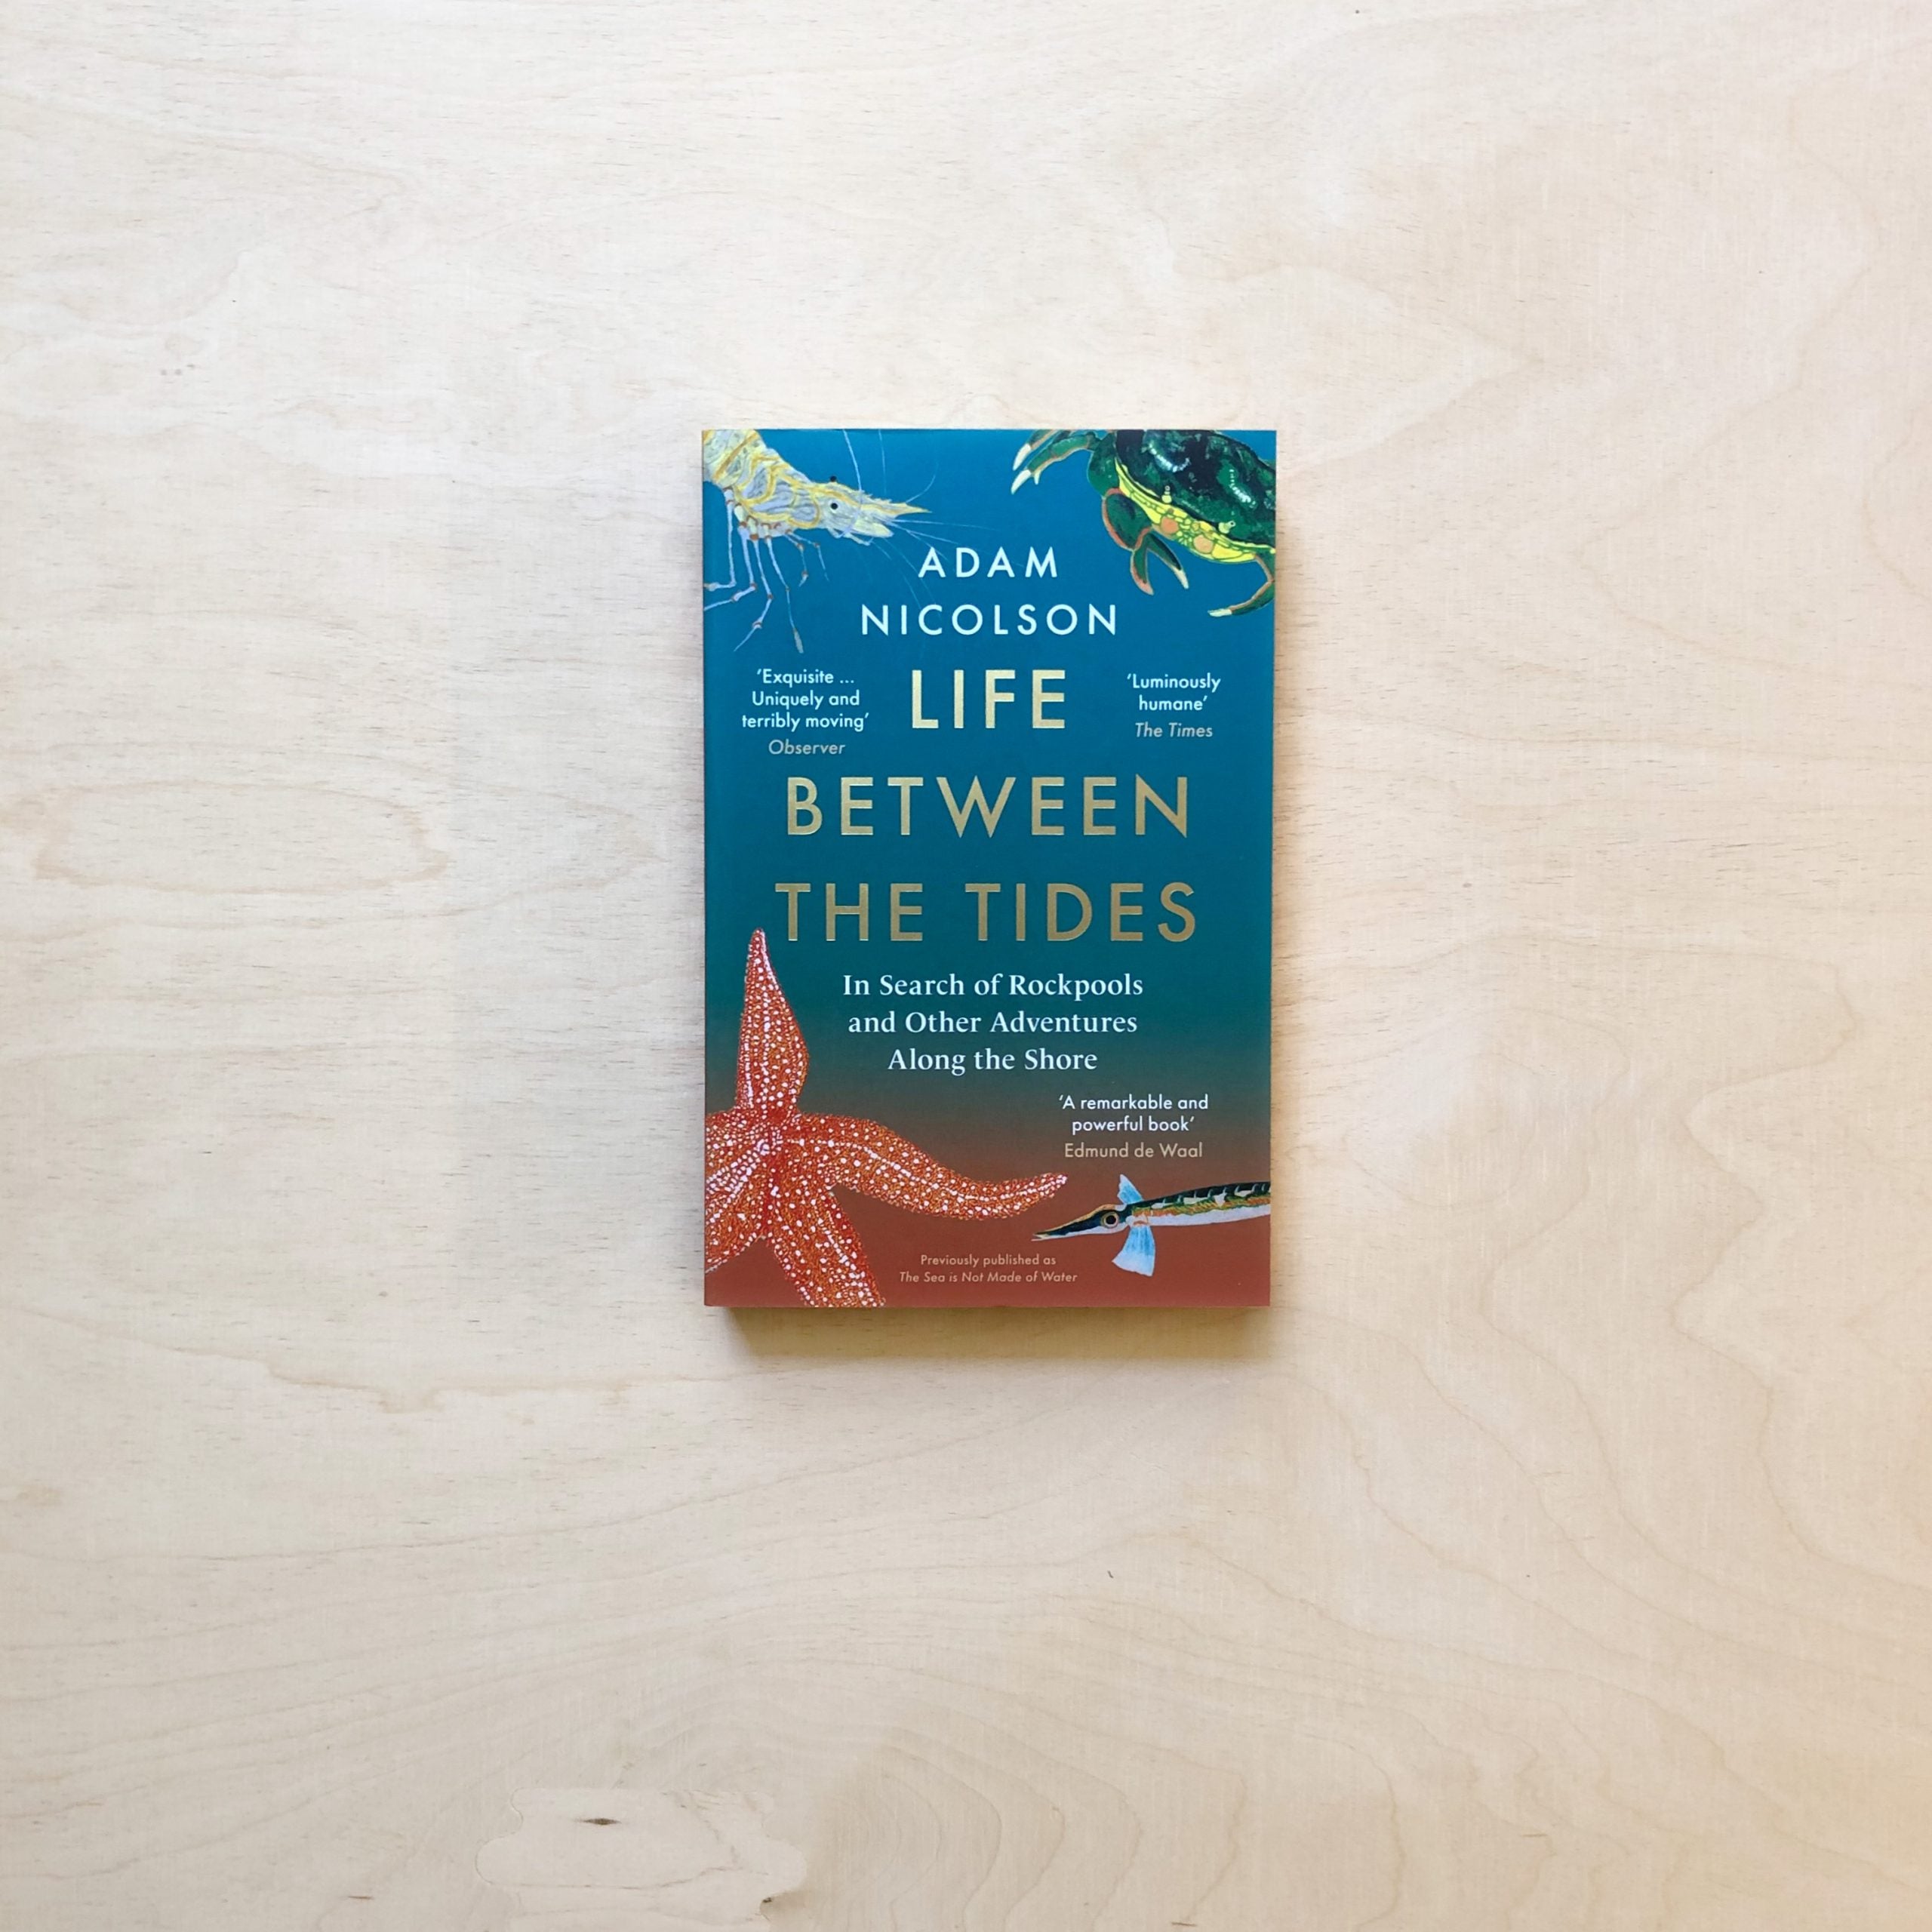 Life Between the Tides by Adam Nicolson (9780008294816/Paperback)